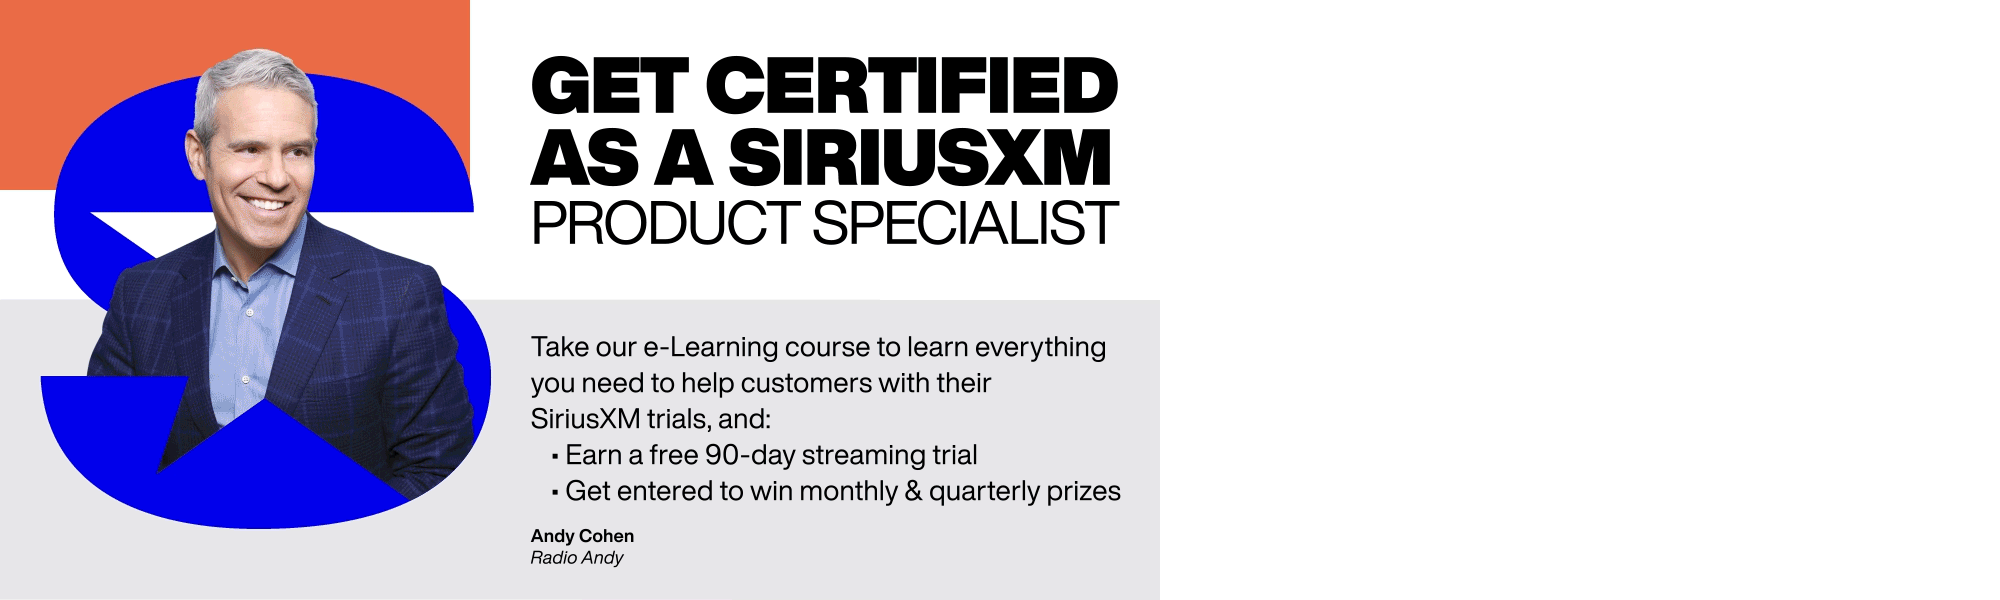 Take the SiriusXM e-Learning course to get certified as a SiriusXM Product Specialist and earn a free 90-day streaming trial to listen on the SXM App plus get a chance to win monthly & quarterly prizes.